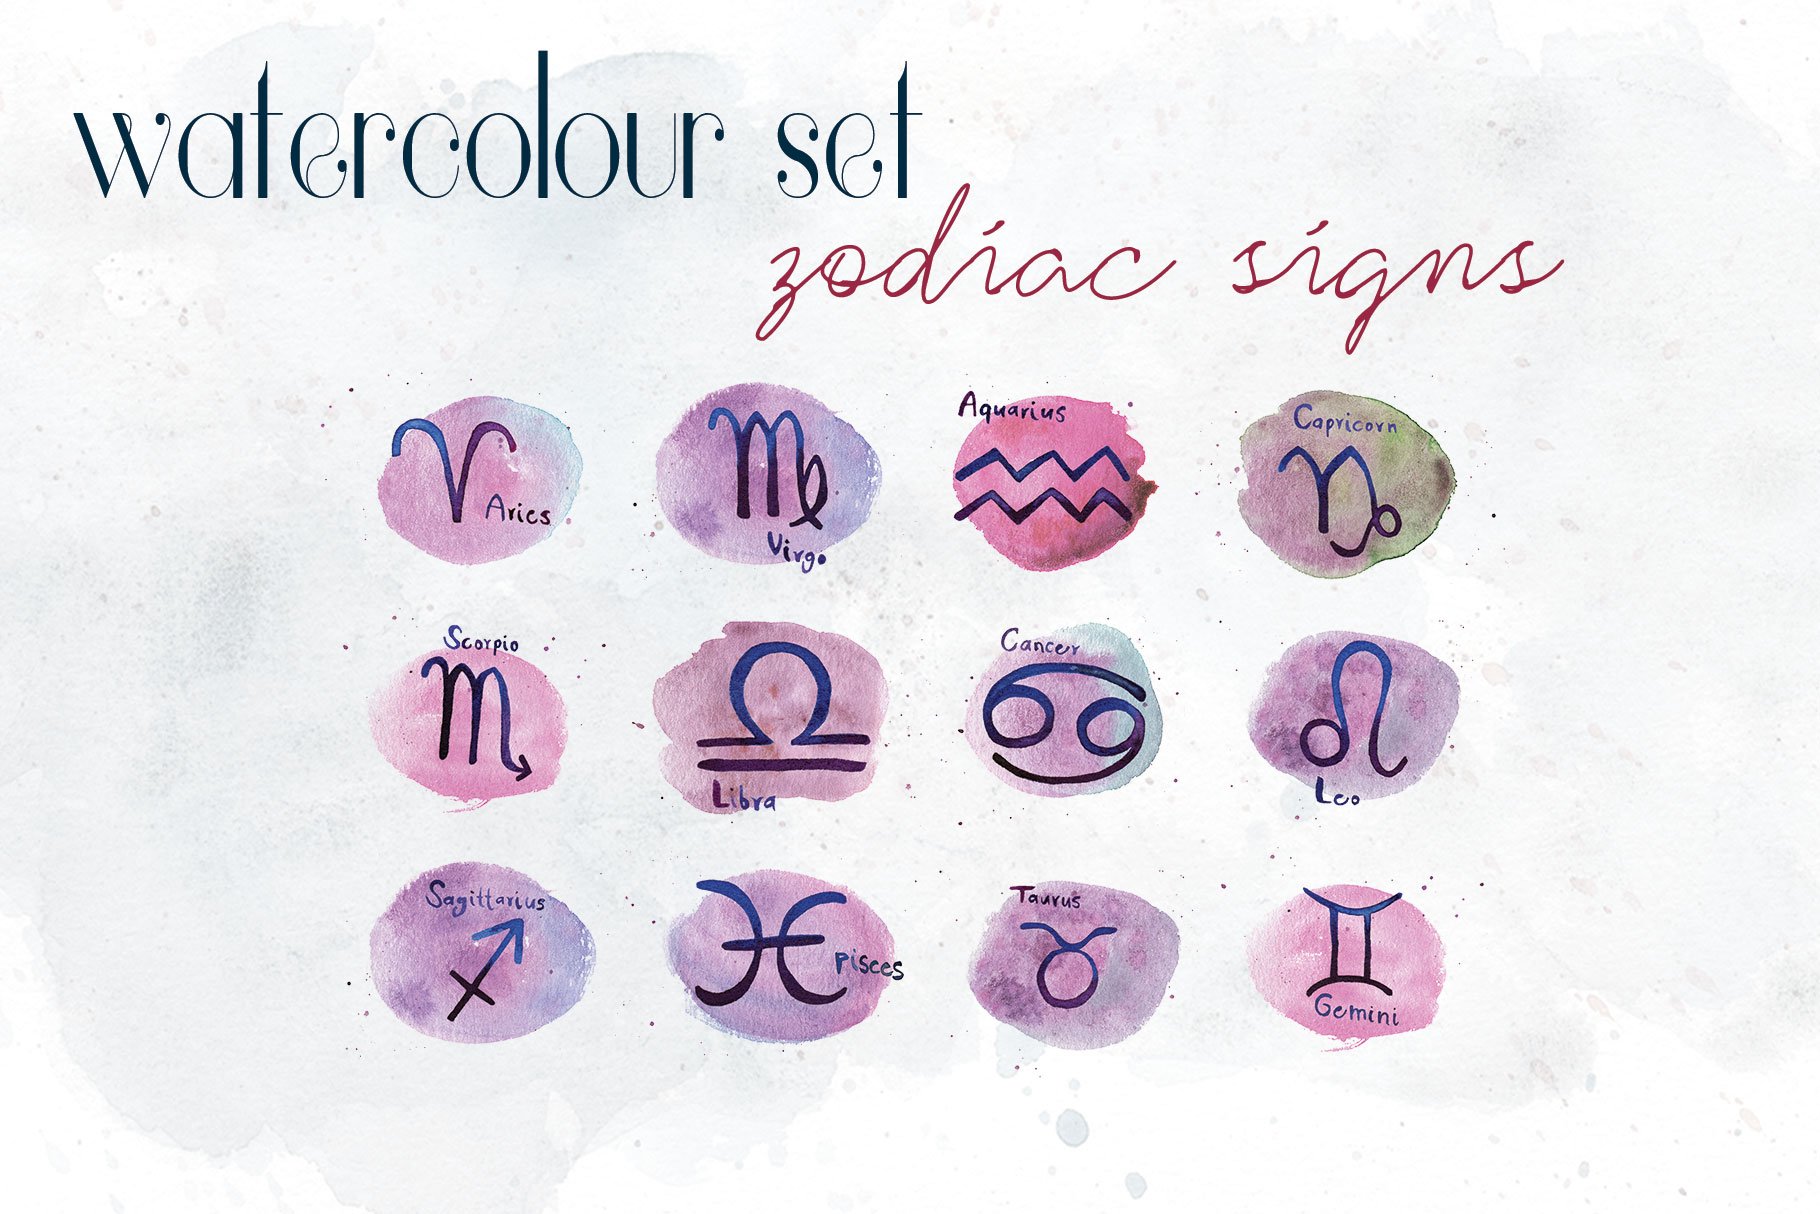 Zodiac Signs Watercolor Backgrounds cover image.